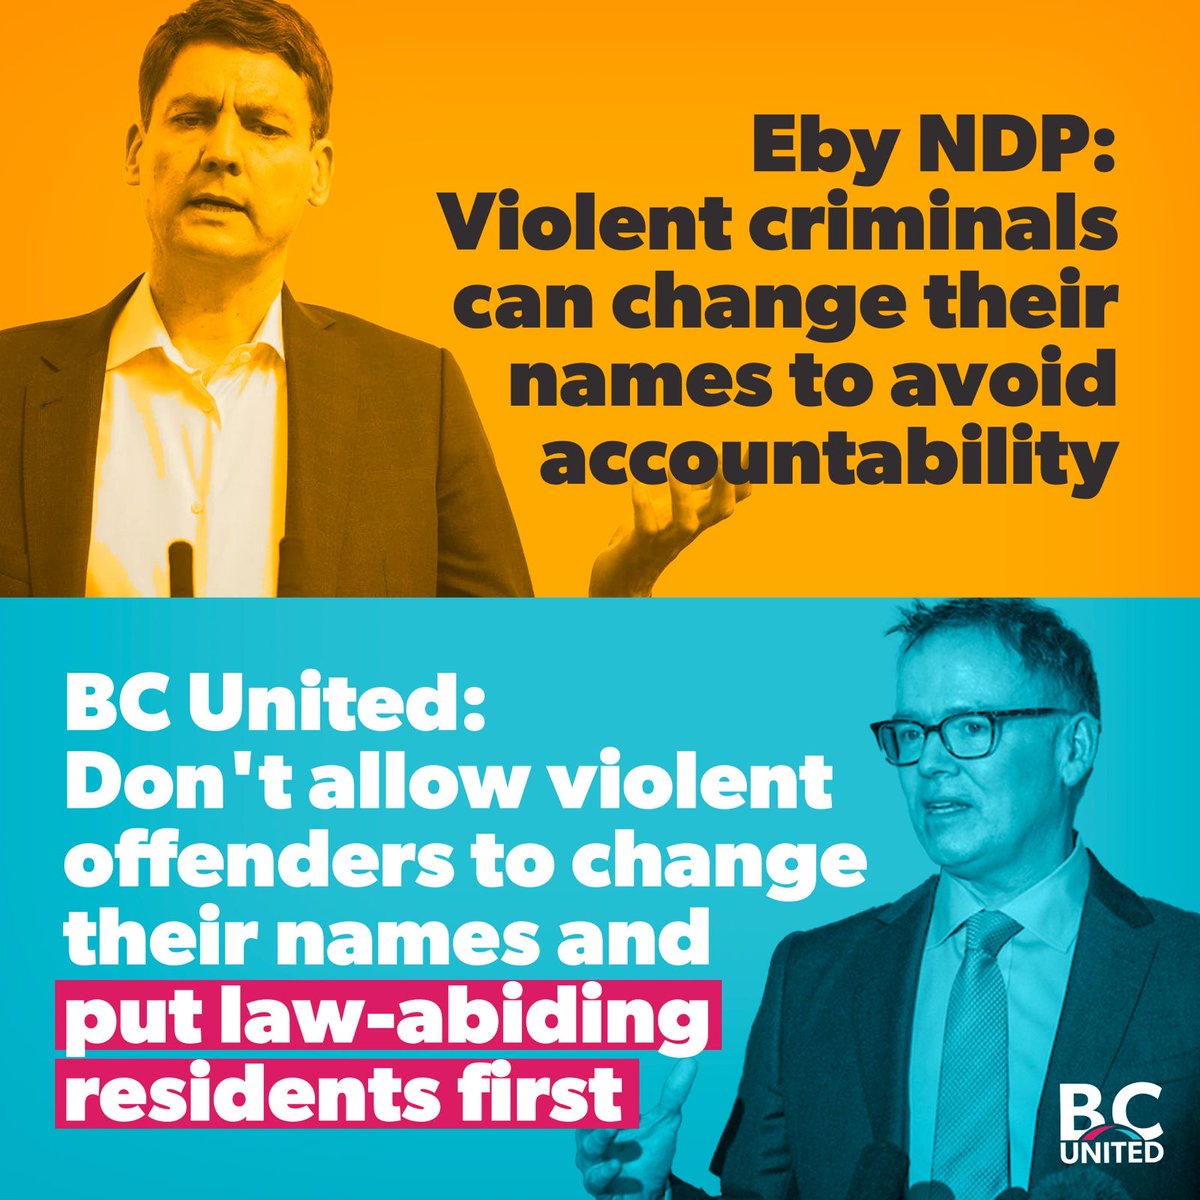 Kevin Falcon has introduced a Bill that would ban violent offenders from changing their names to hide their identities. We’re putting law-abiding residents first, not criminals.